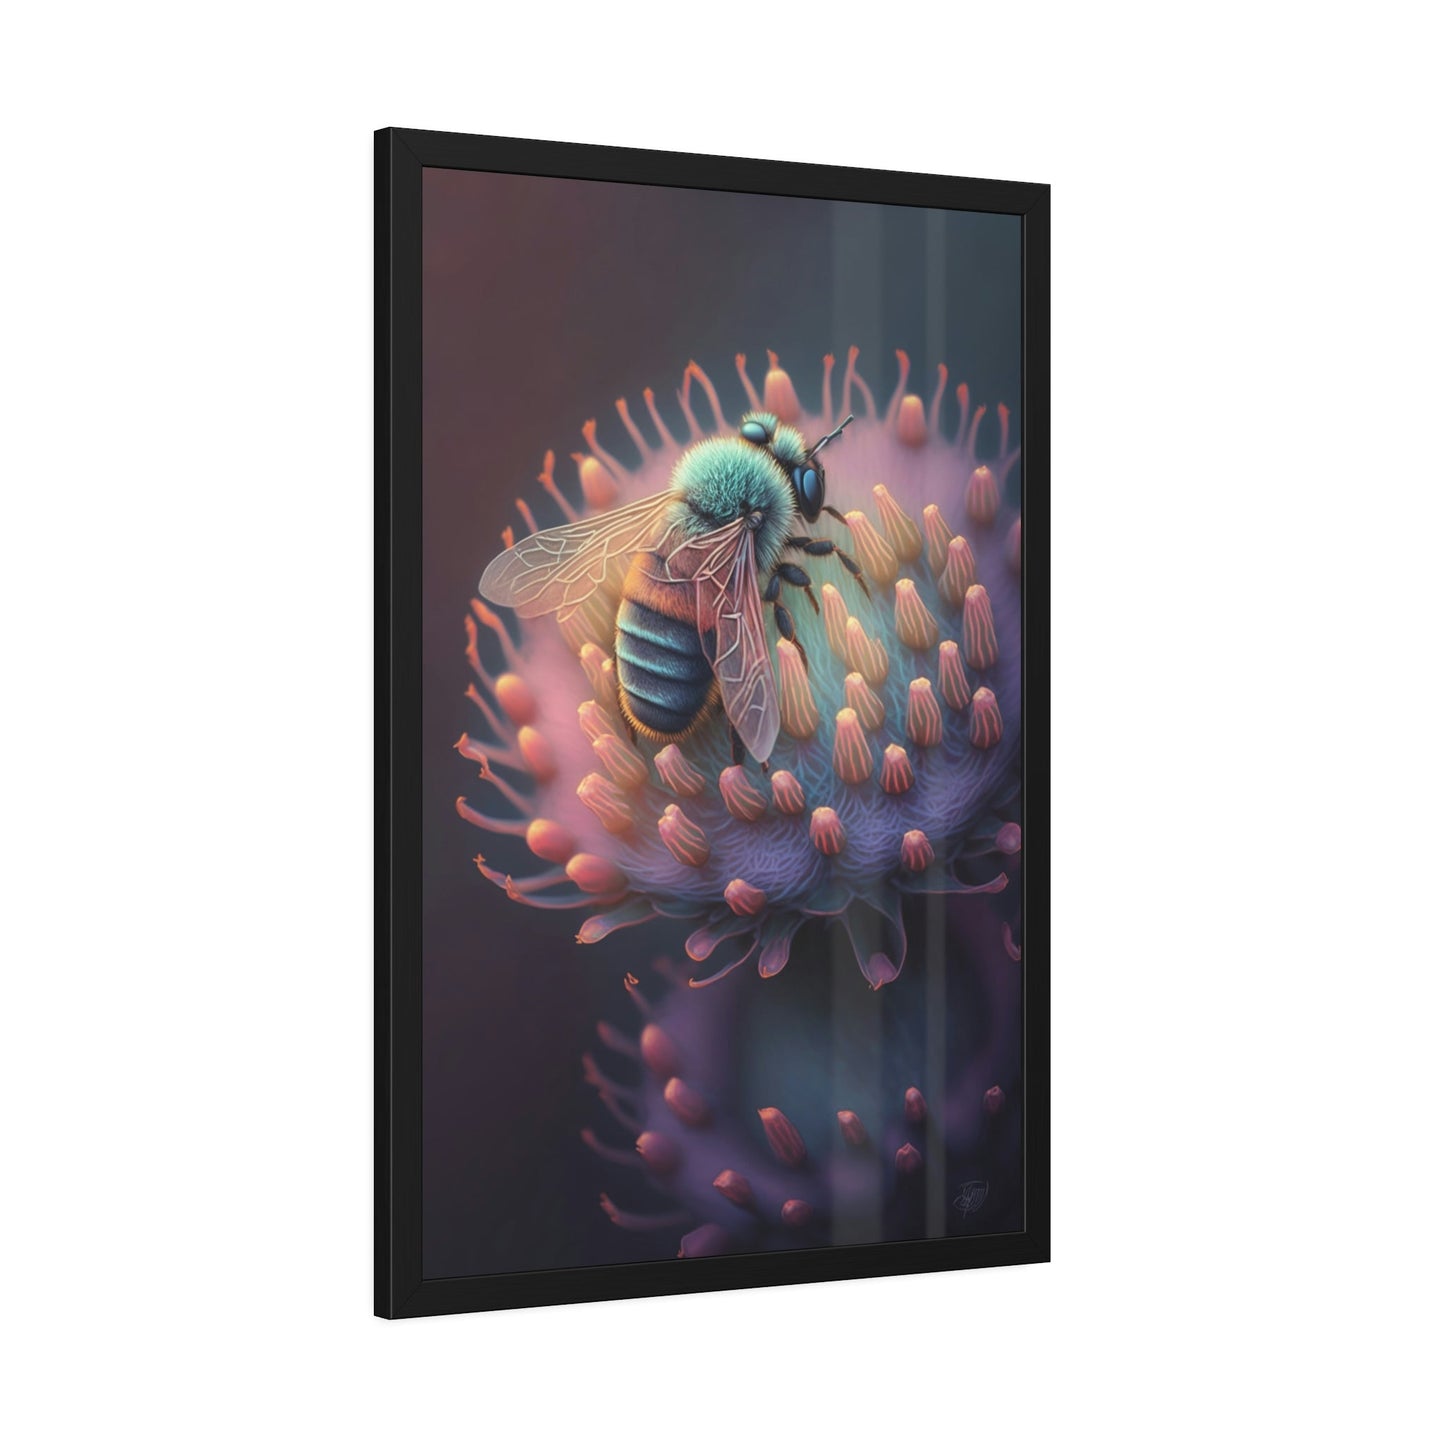 A Busy Bee's Day: Canvas & Poster Wall Art of a Bee Collecting Nectar from Sunrise to Sunset